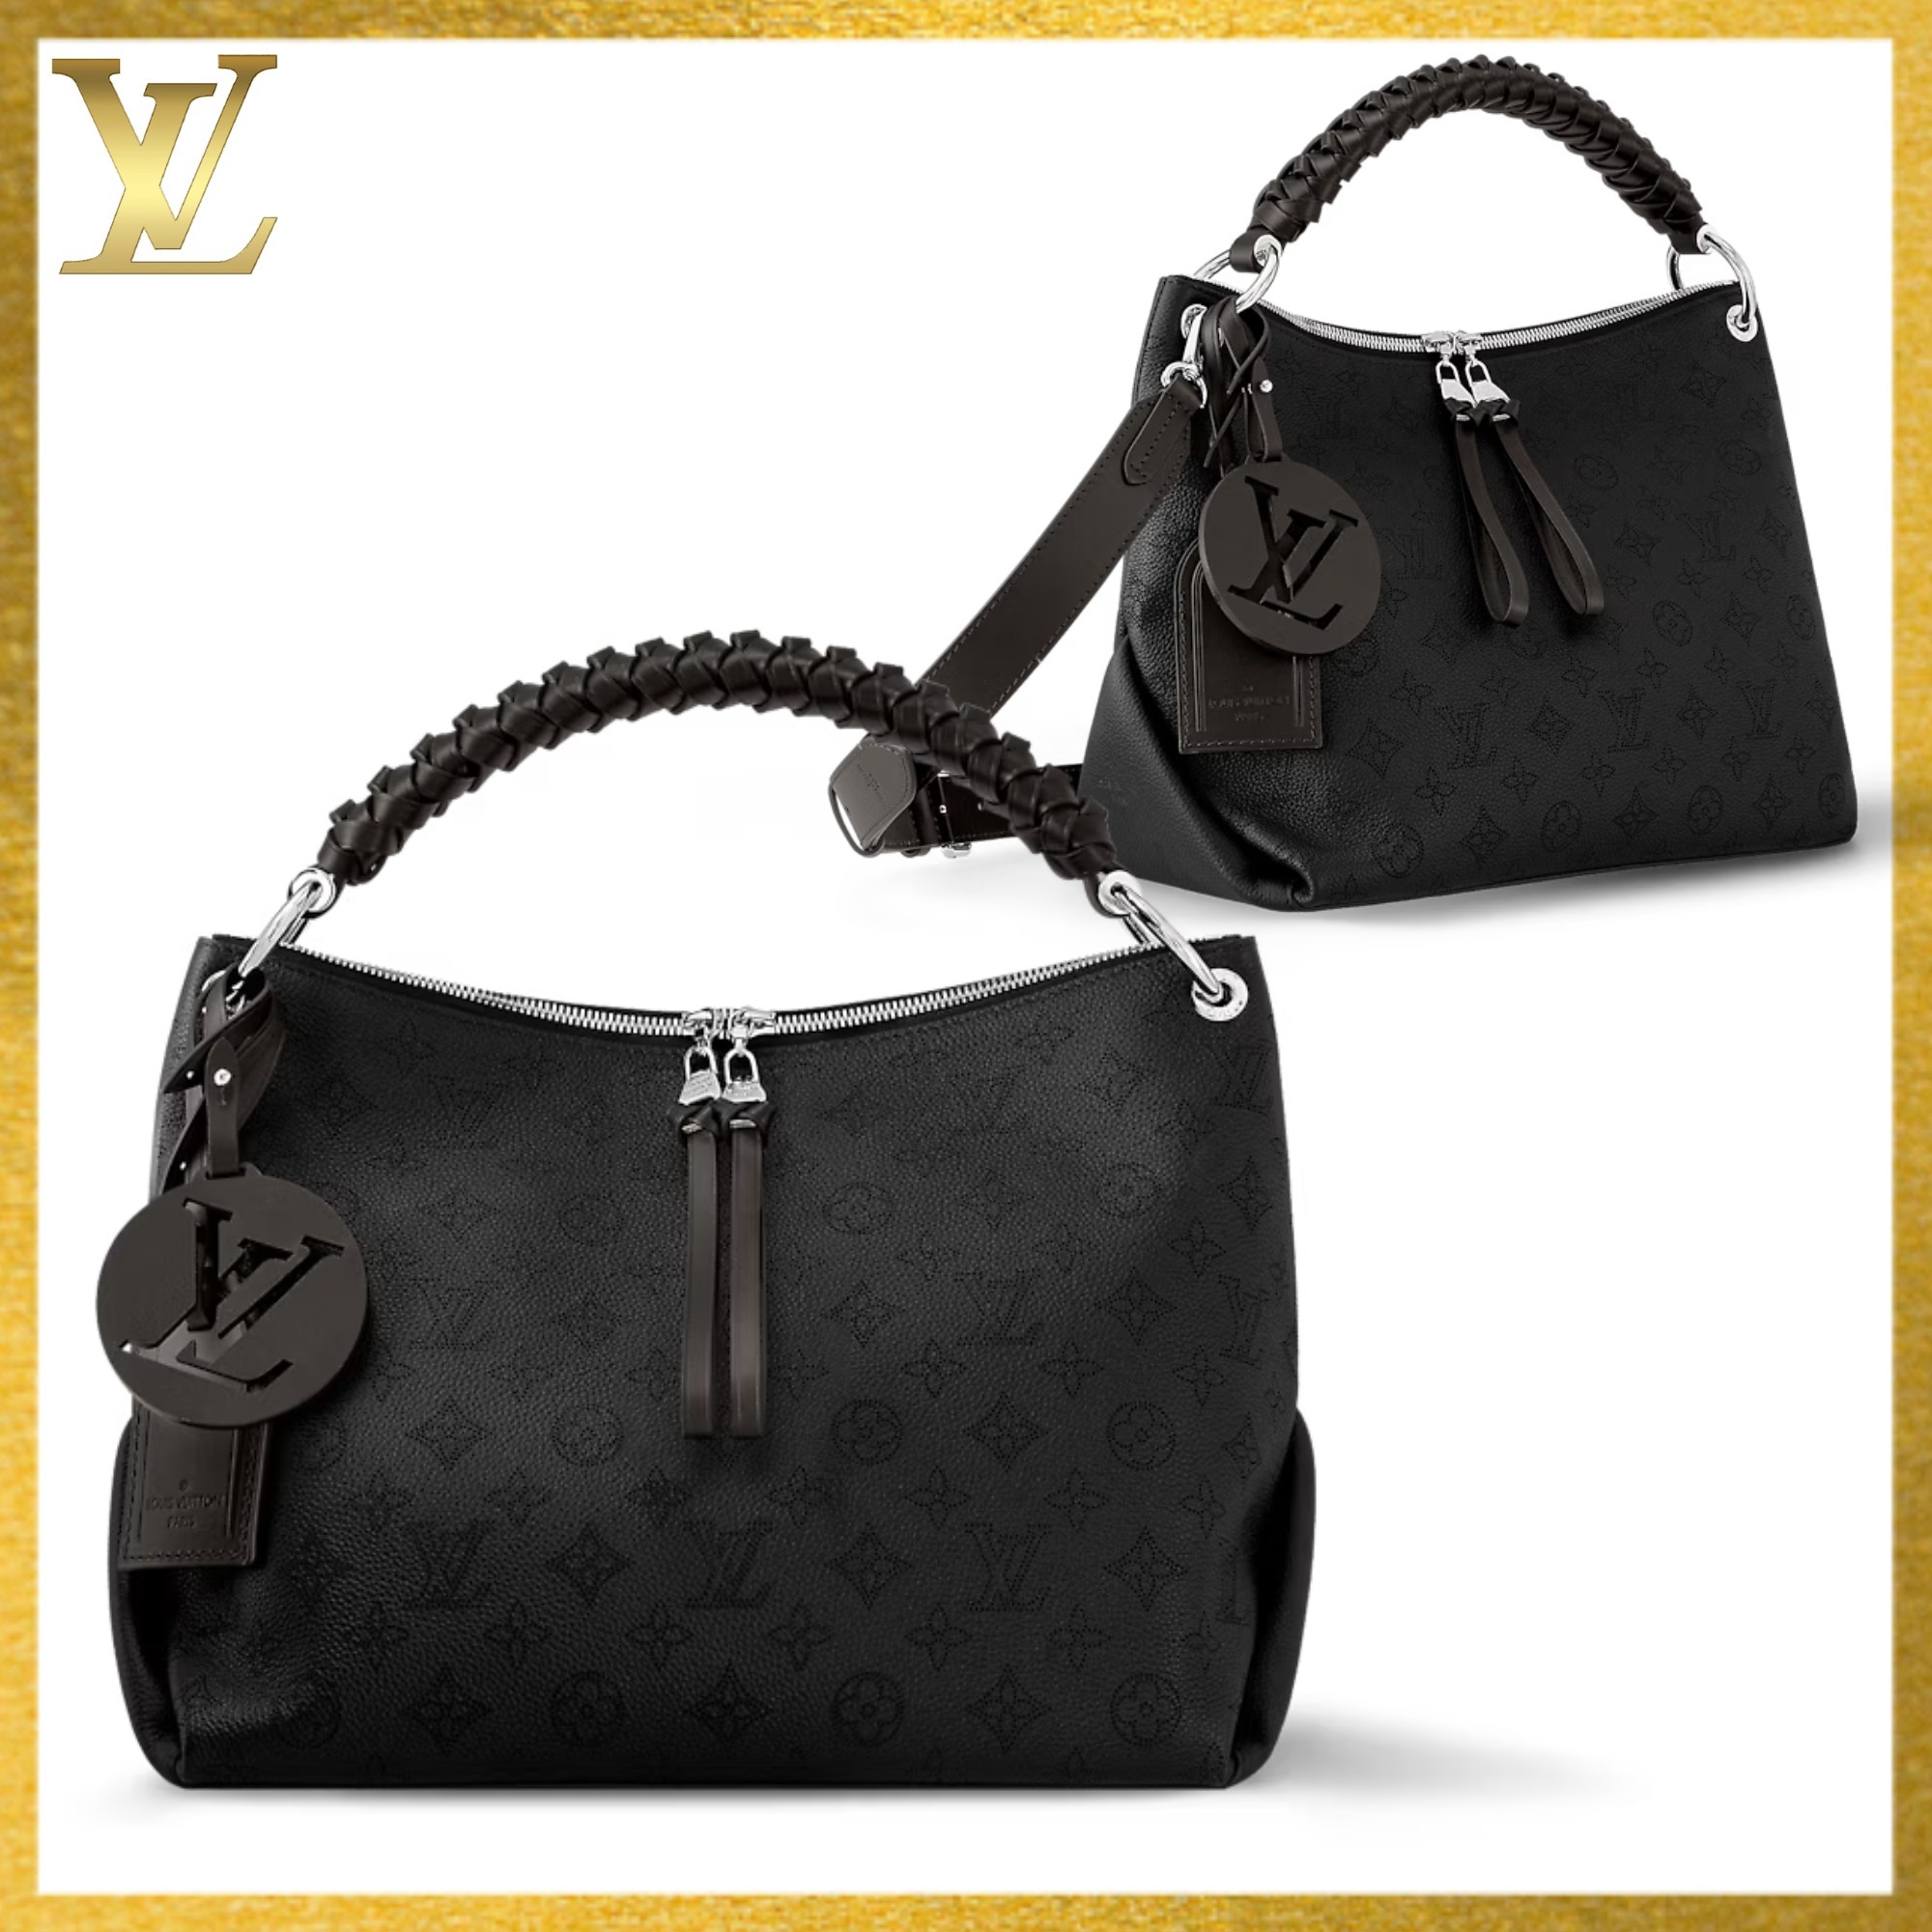 【LOUIS VUITTON】BEAUBOURG ホーボー MM バッグ★人気★ギフト M56073